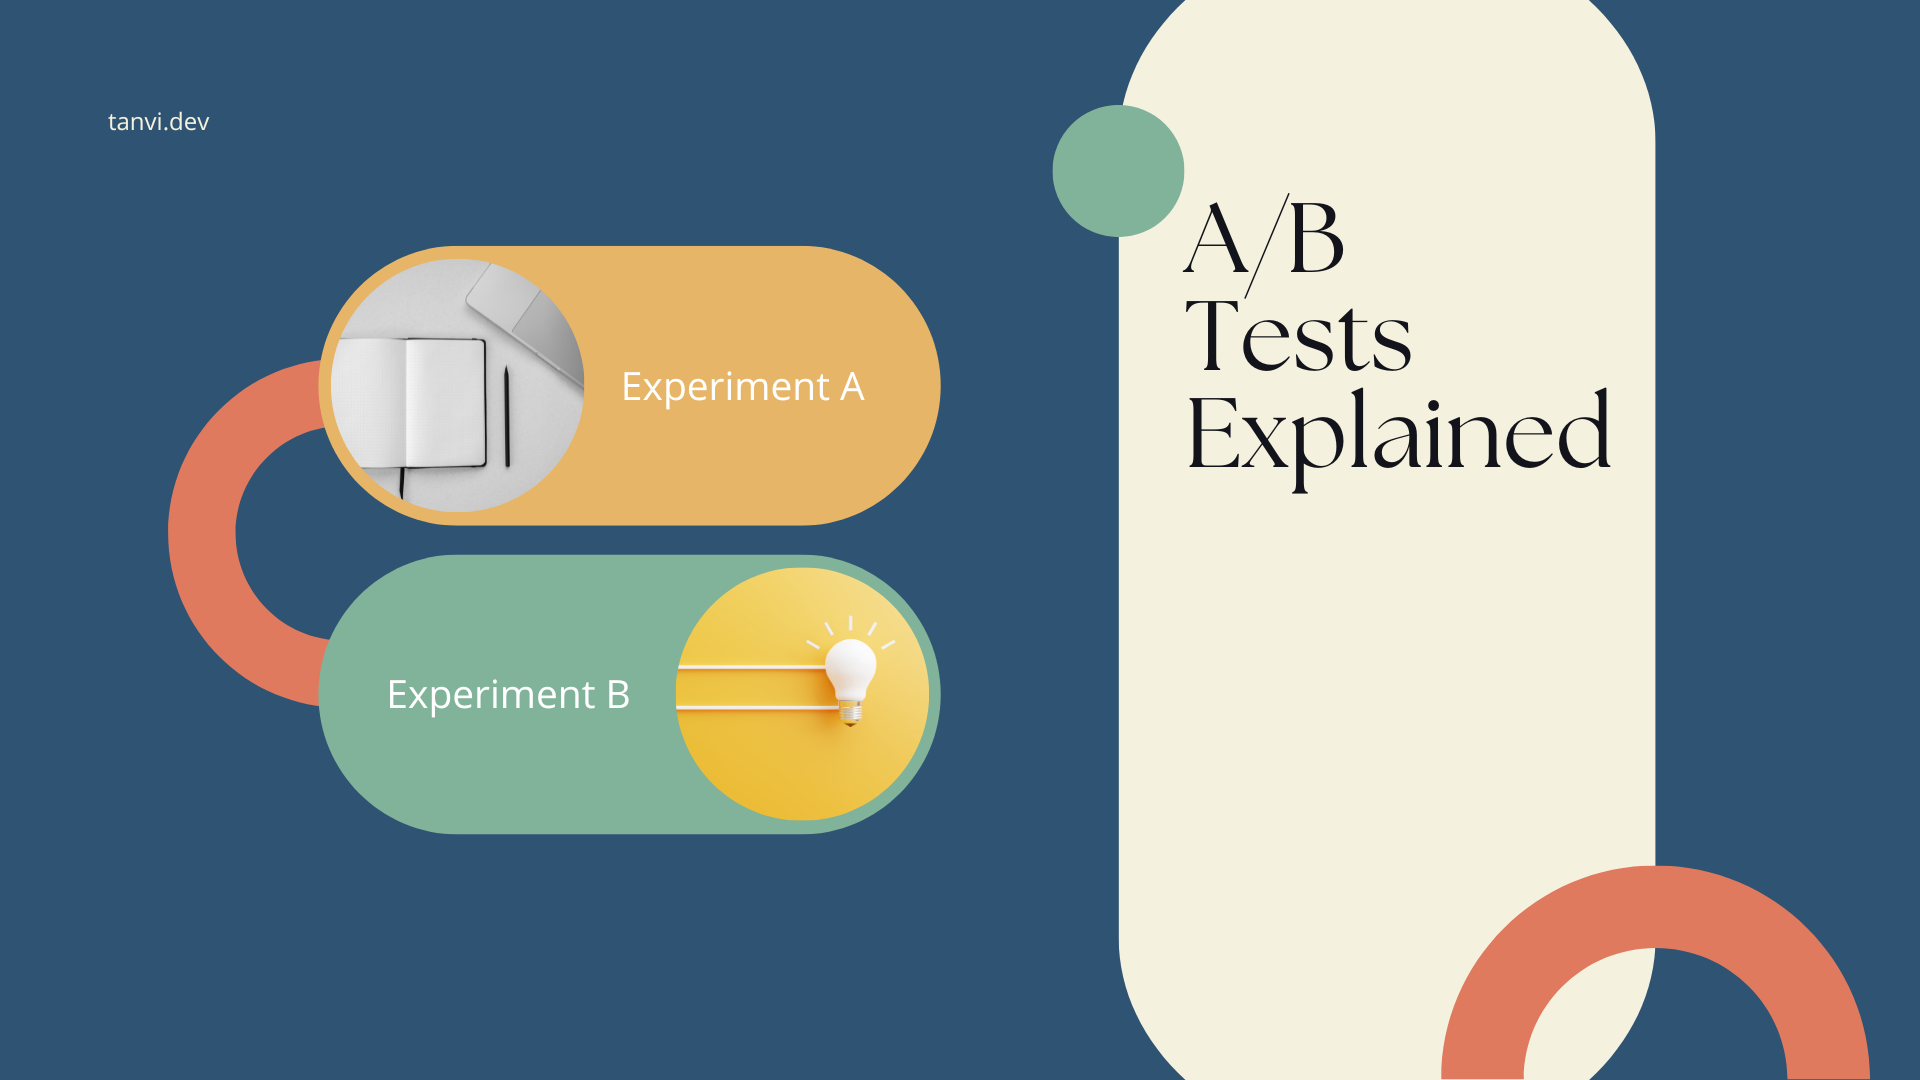 Everything a front end engineer should know about A/B testing